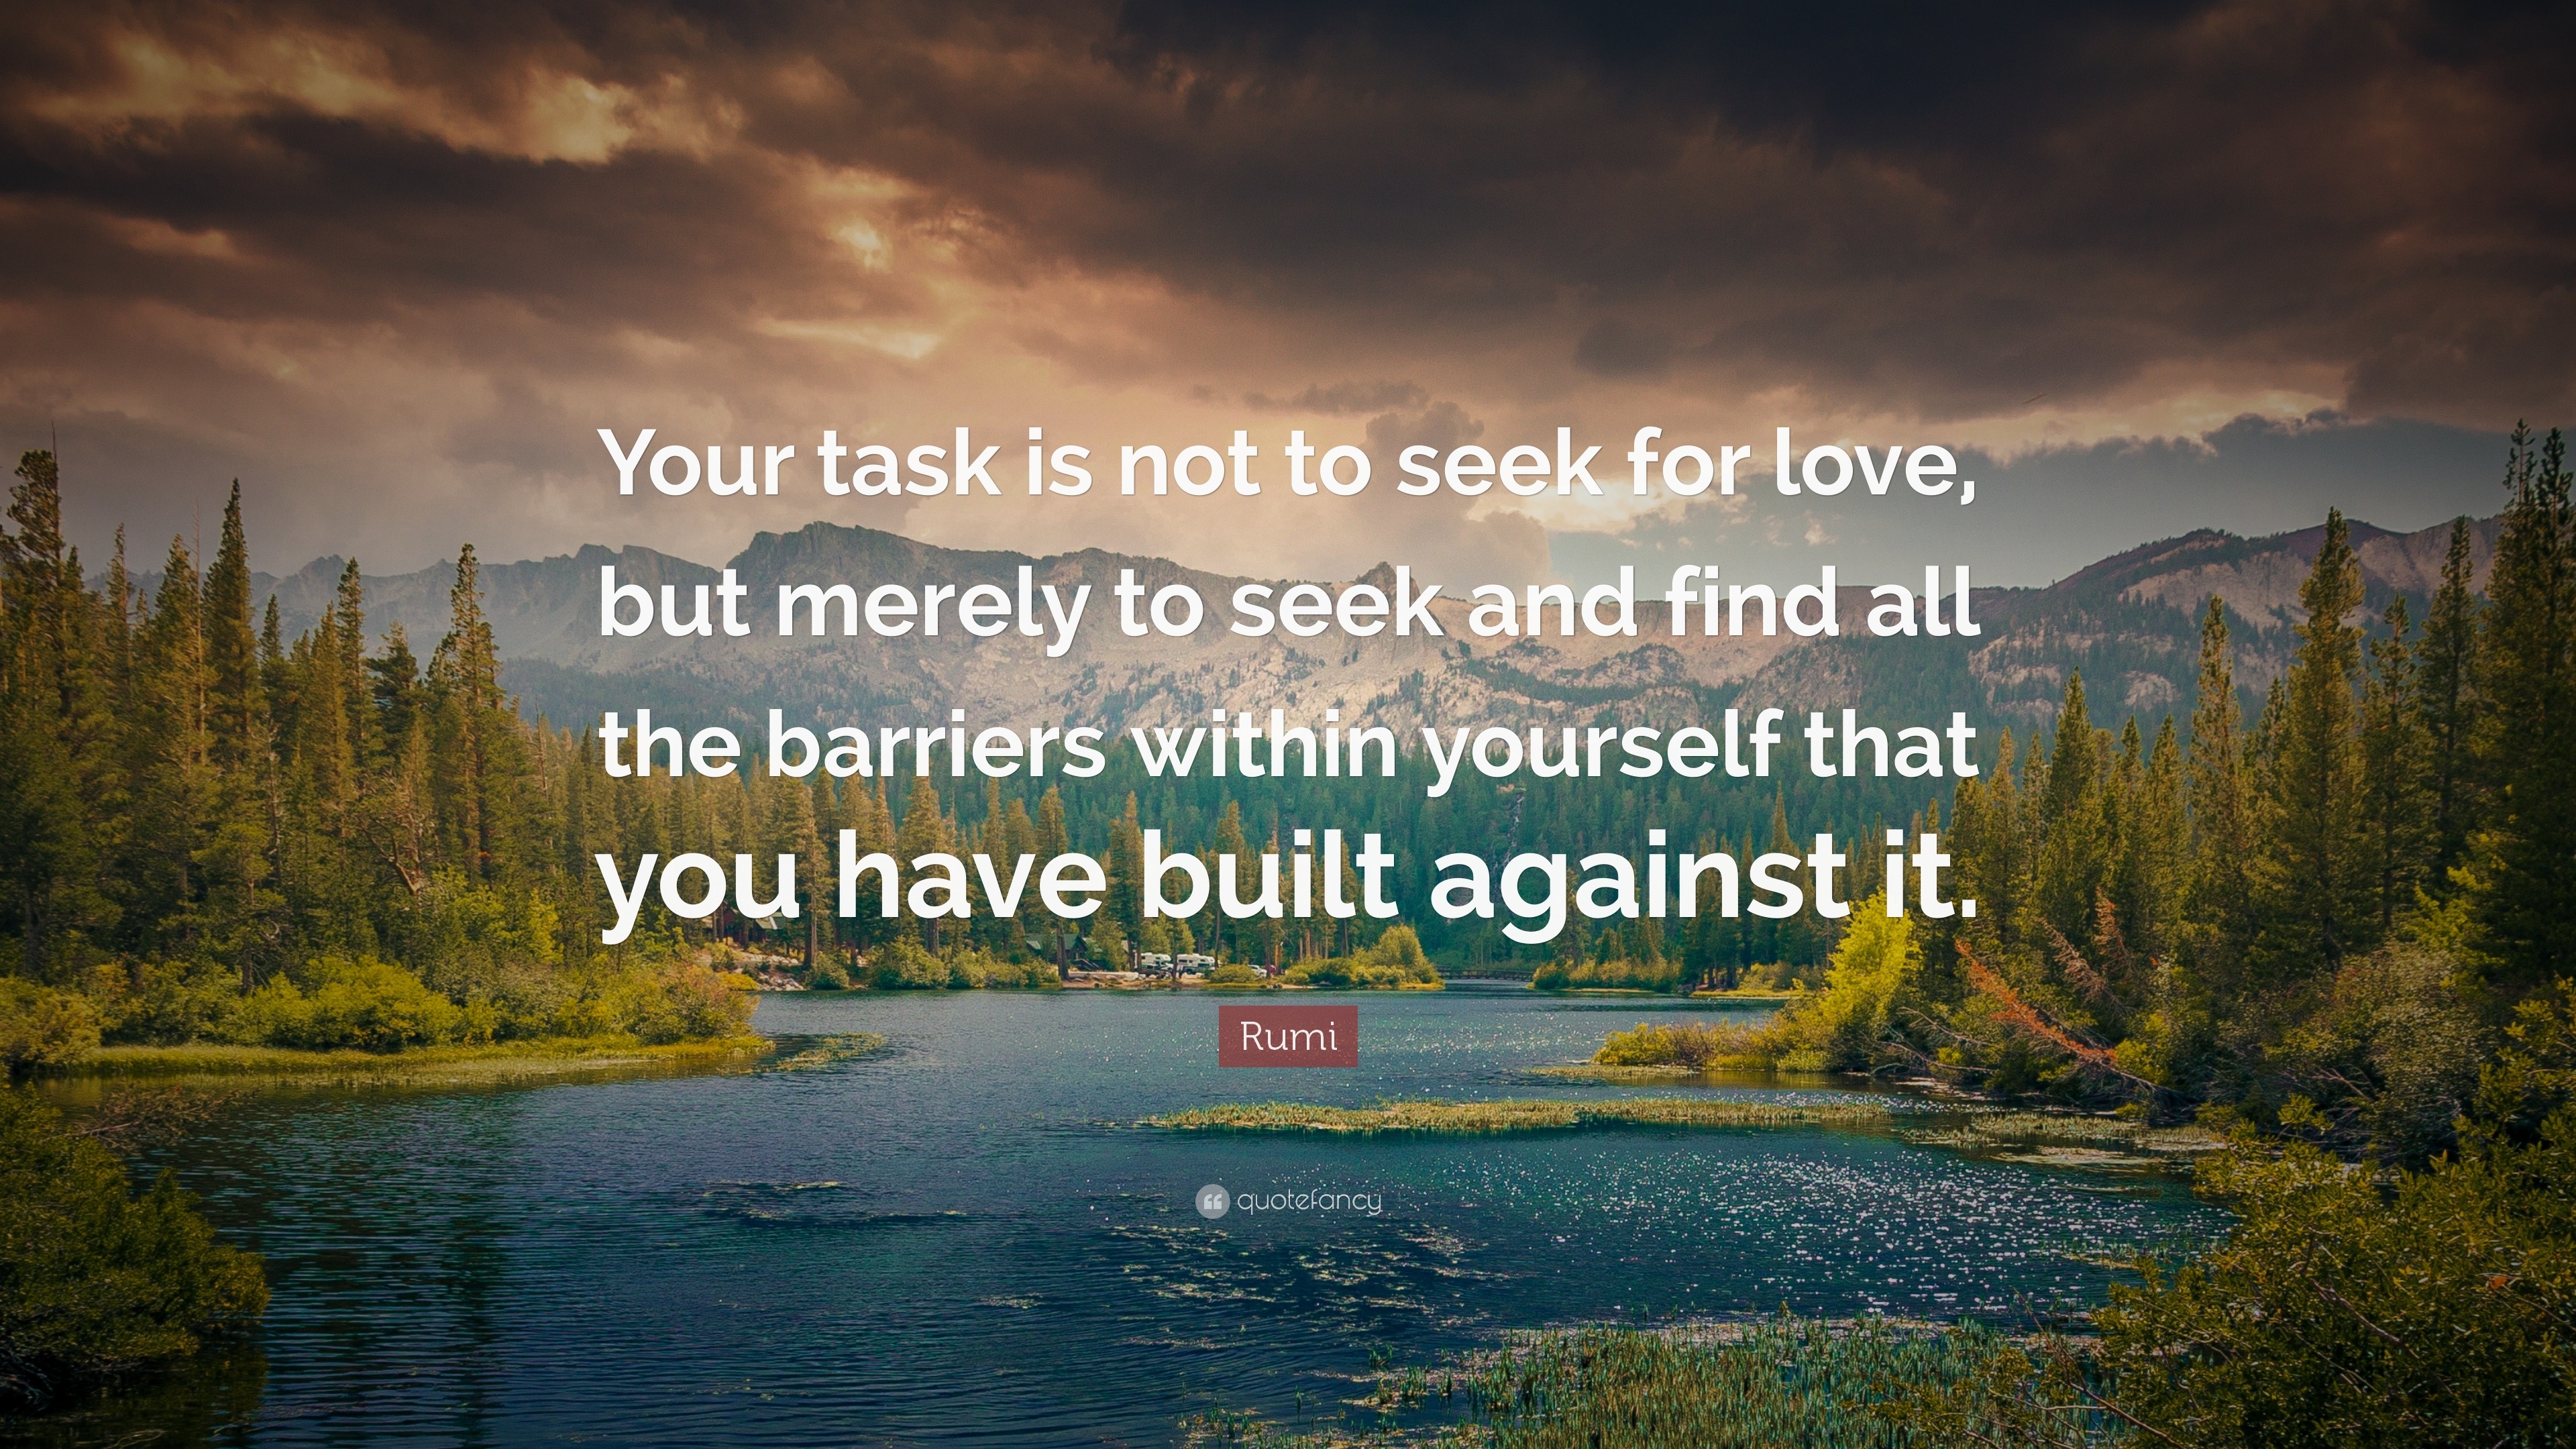 Love Quotes “Your task is not to seek for love but merely to